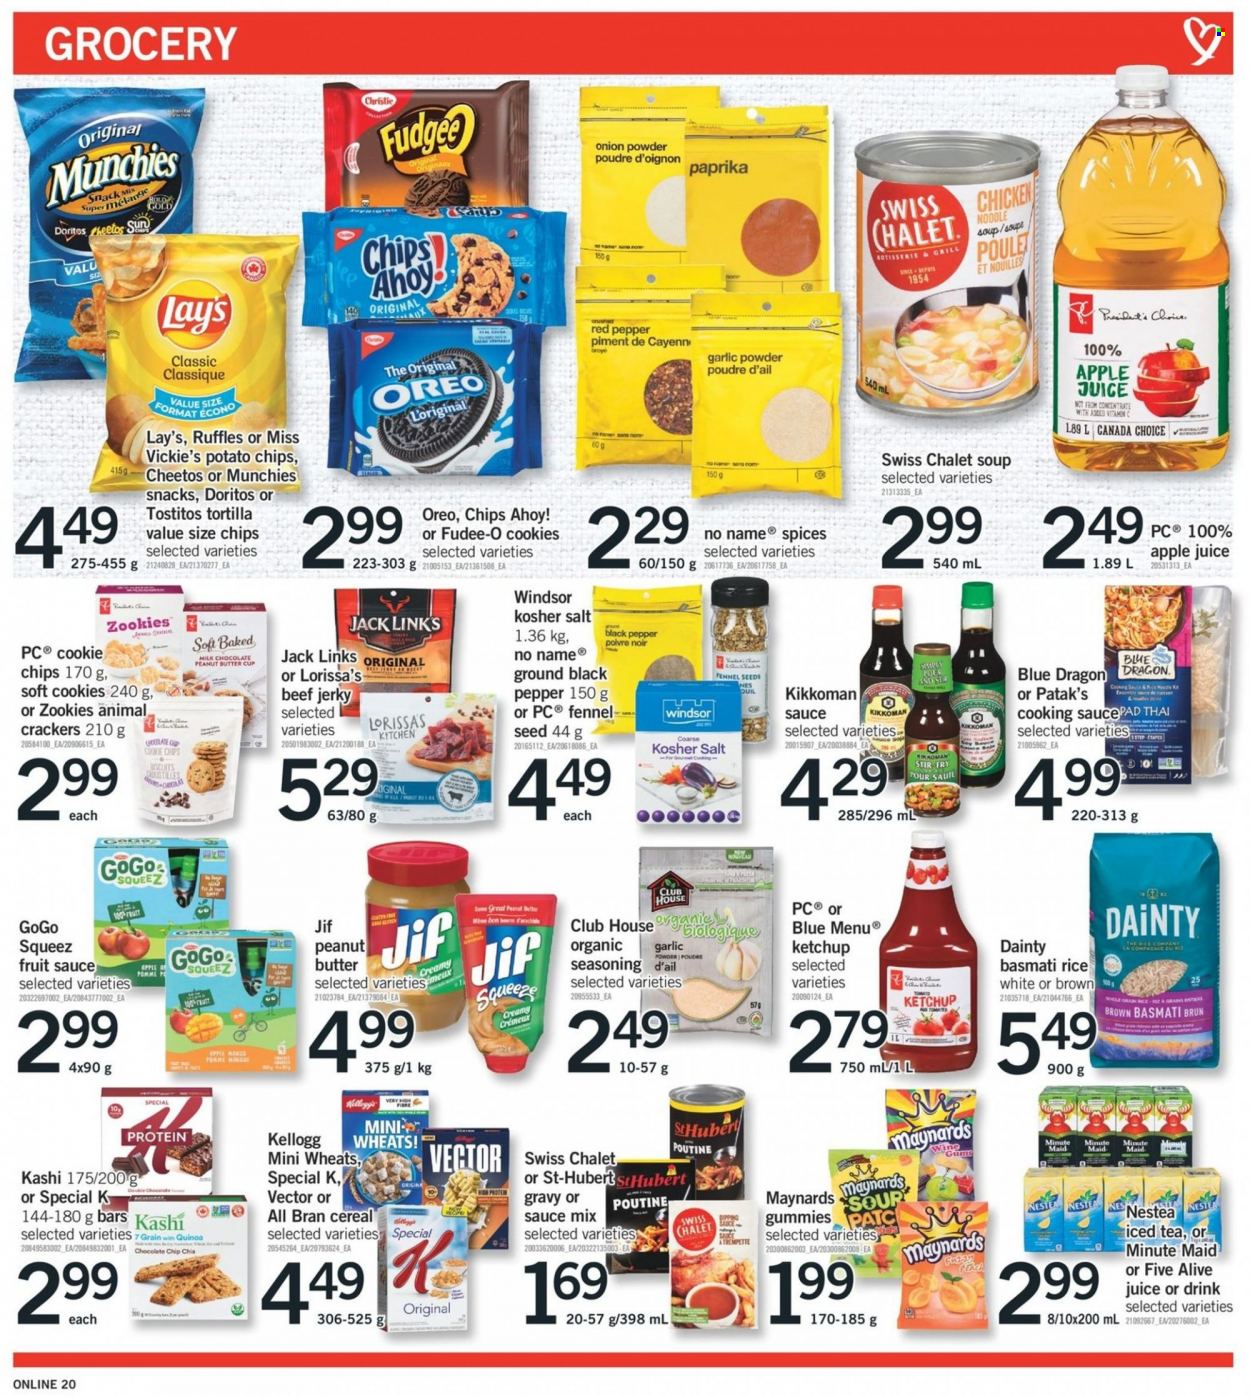 thumbnail - Fortinos Flyer - January 13, 2022 - January 19, 2022 - Sales products - tortillas, No Name, soup, noodles, beef jerky, jerky, cookies, fudge, milk chocolate, snack, crackers, Kellogg's, peanut butter cups, Chips Ahoy!, Doritos, potato chips, Cheetos, Lay’s, Ruffles, Tostitos, Jack Link's, cereals, All-Bran, basmati rice, rice, fennel, spice, garlic powder, onion powder, Kikkoman, peanut butter, Jif, apple juice, juice, ice tea, fruit punch, cup, plant seeds, Oreo, quinoa, ketchup, chips. Page 21.